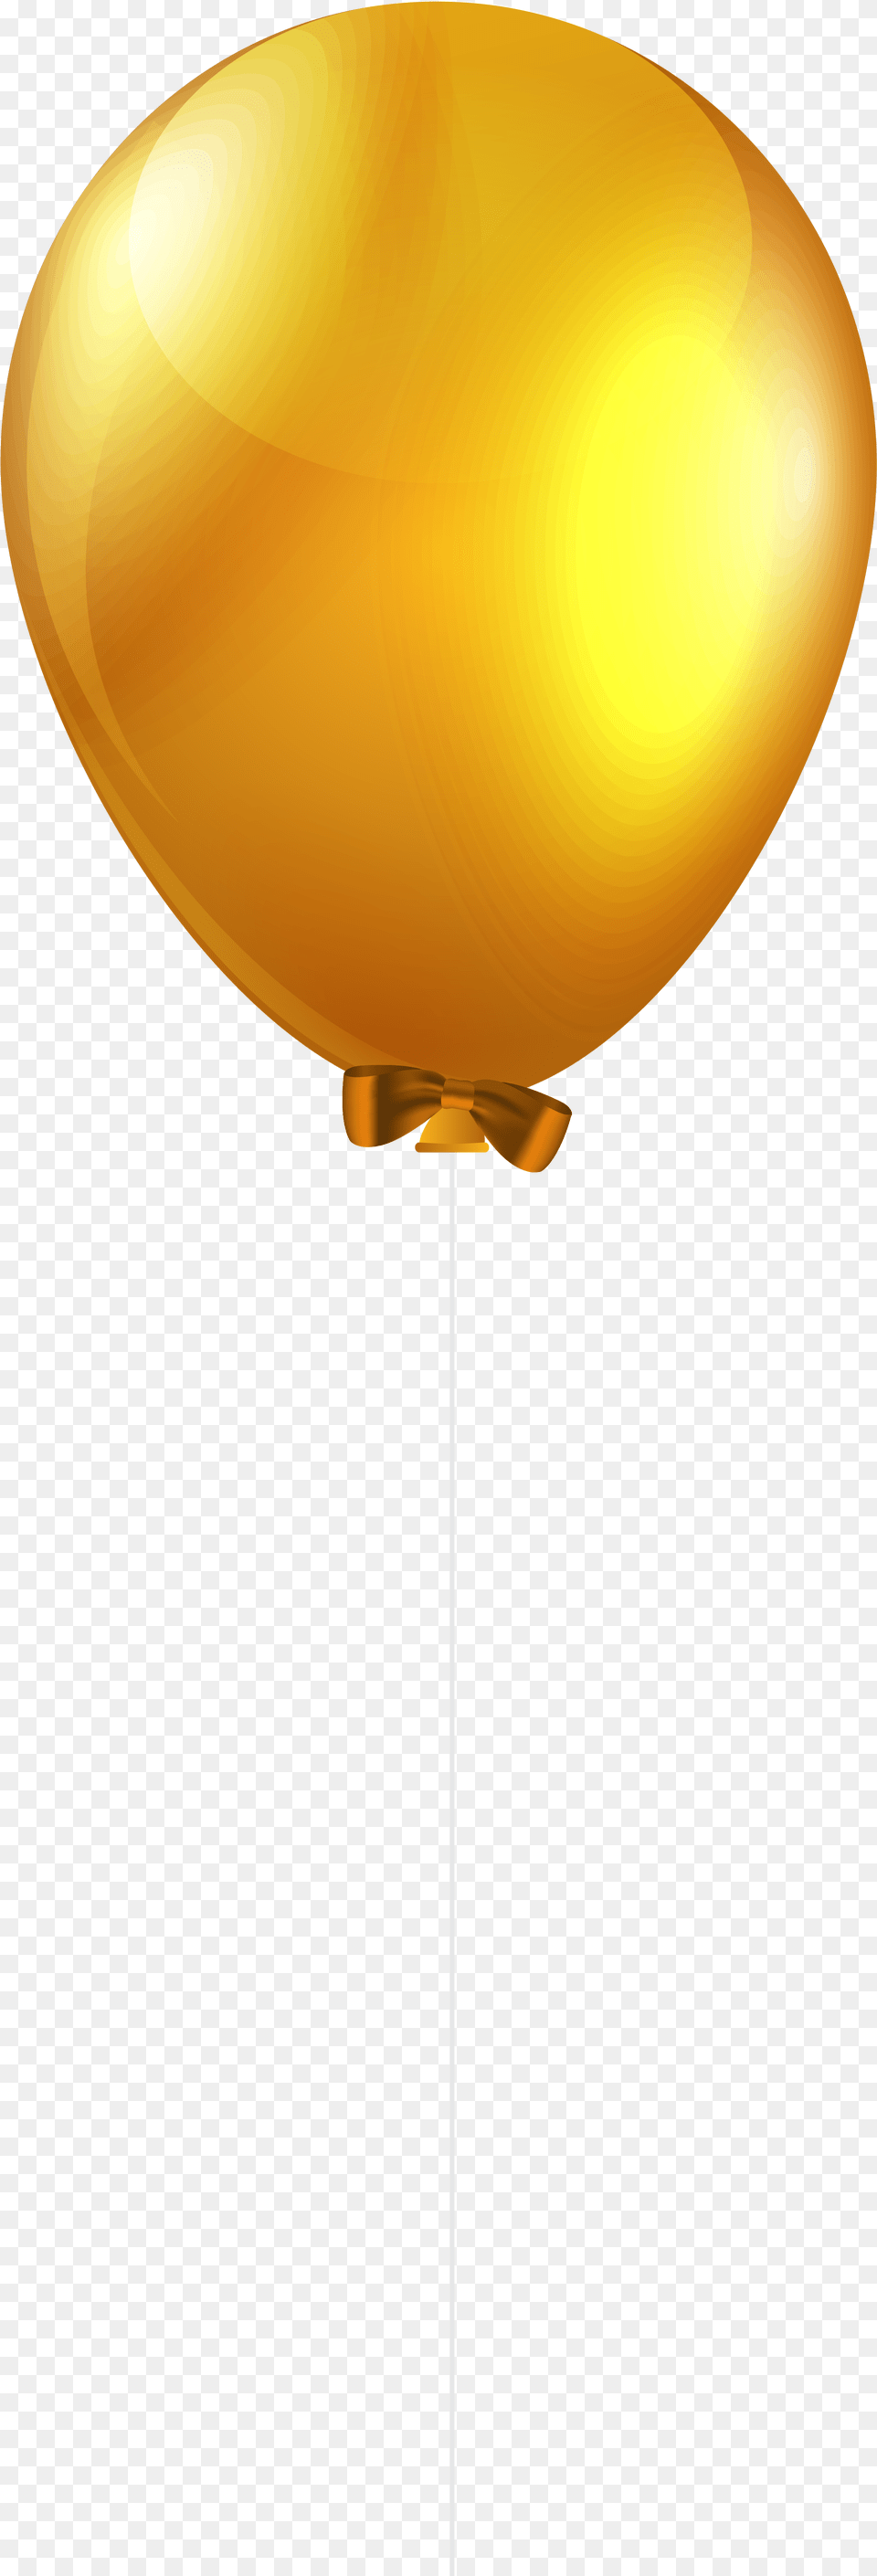 Golden Balloons Picture Gold Balloon, Lamp, Lighting, Lampshade Png